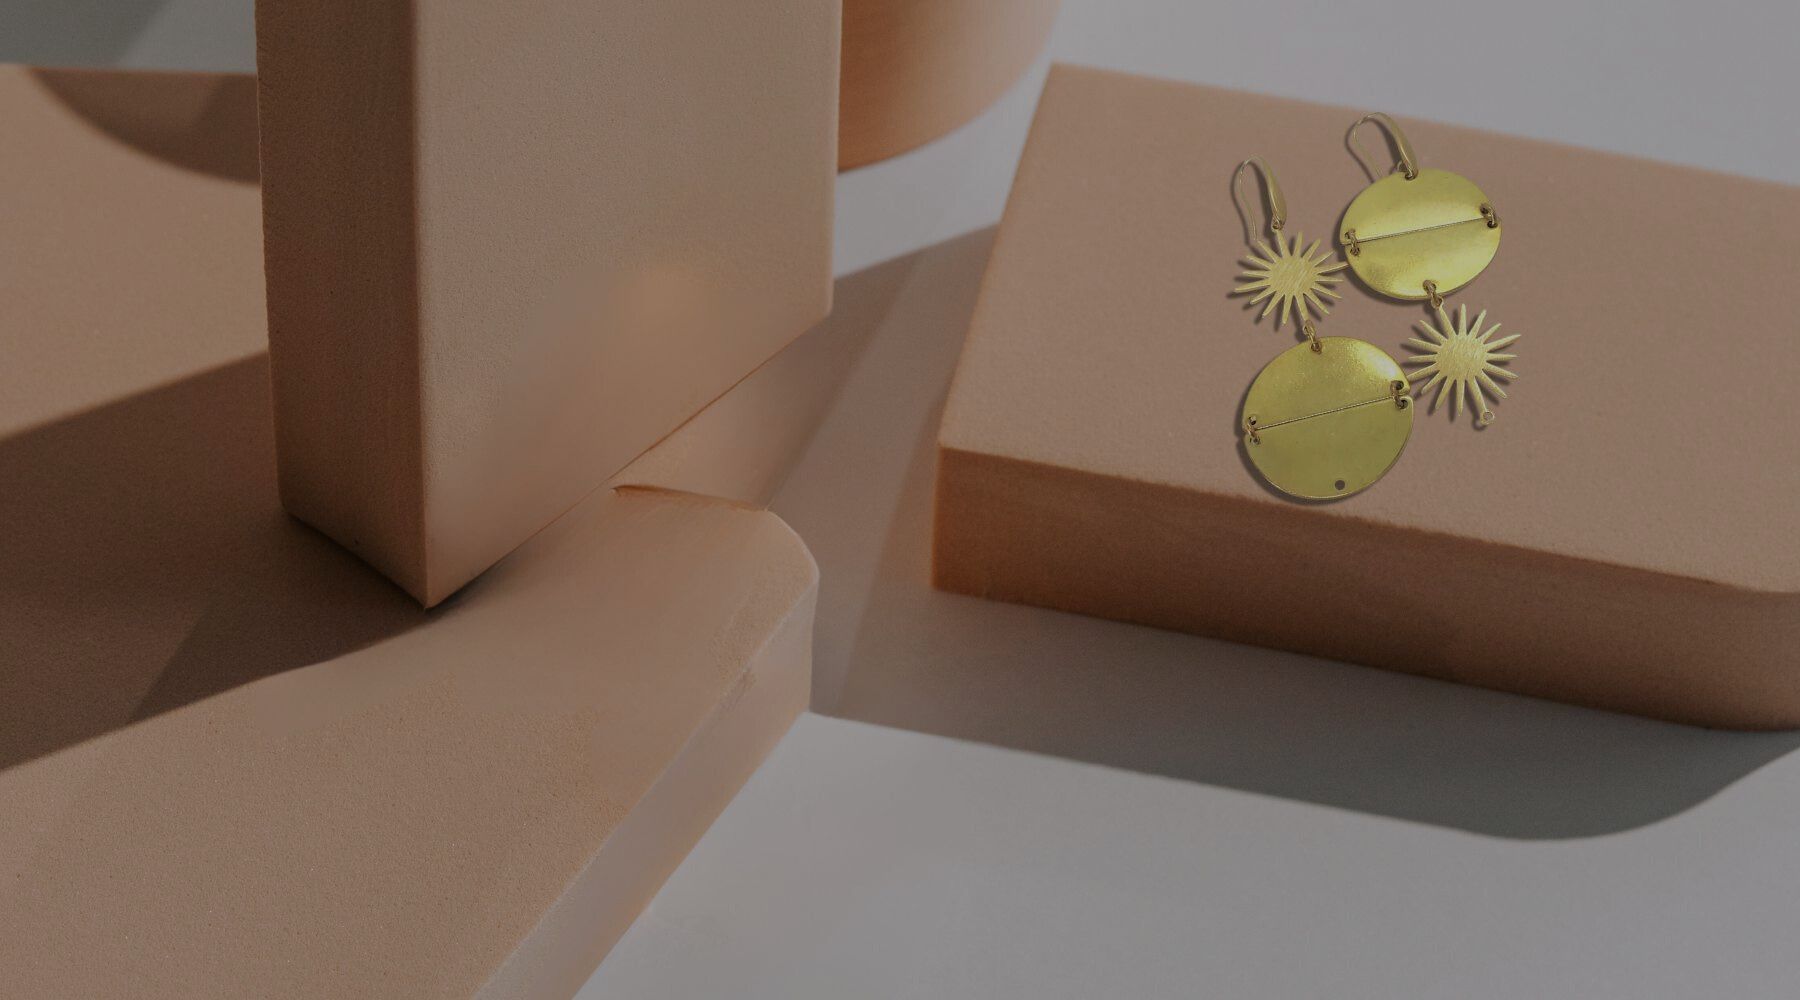 Gold-plated twin eclipse earrings sitting atop a box.